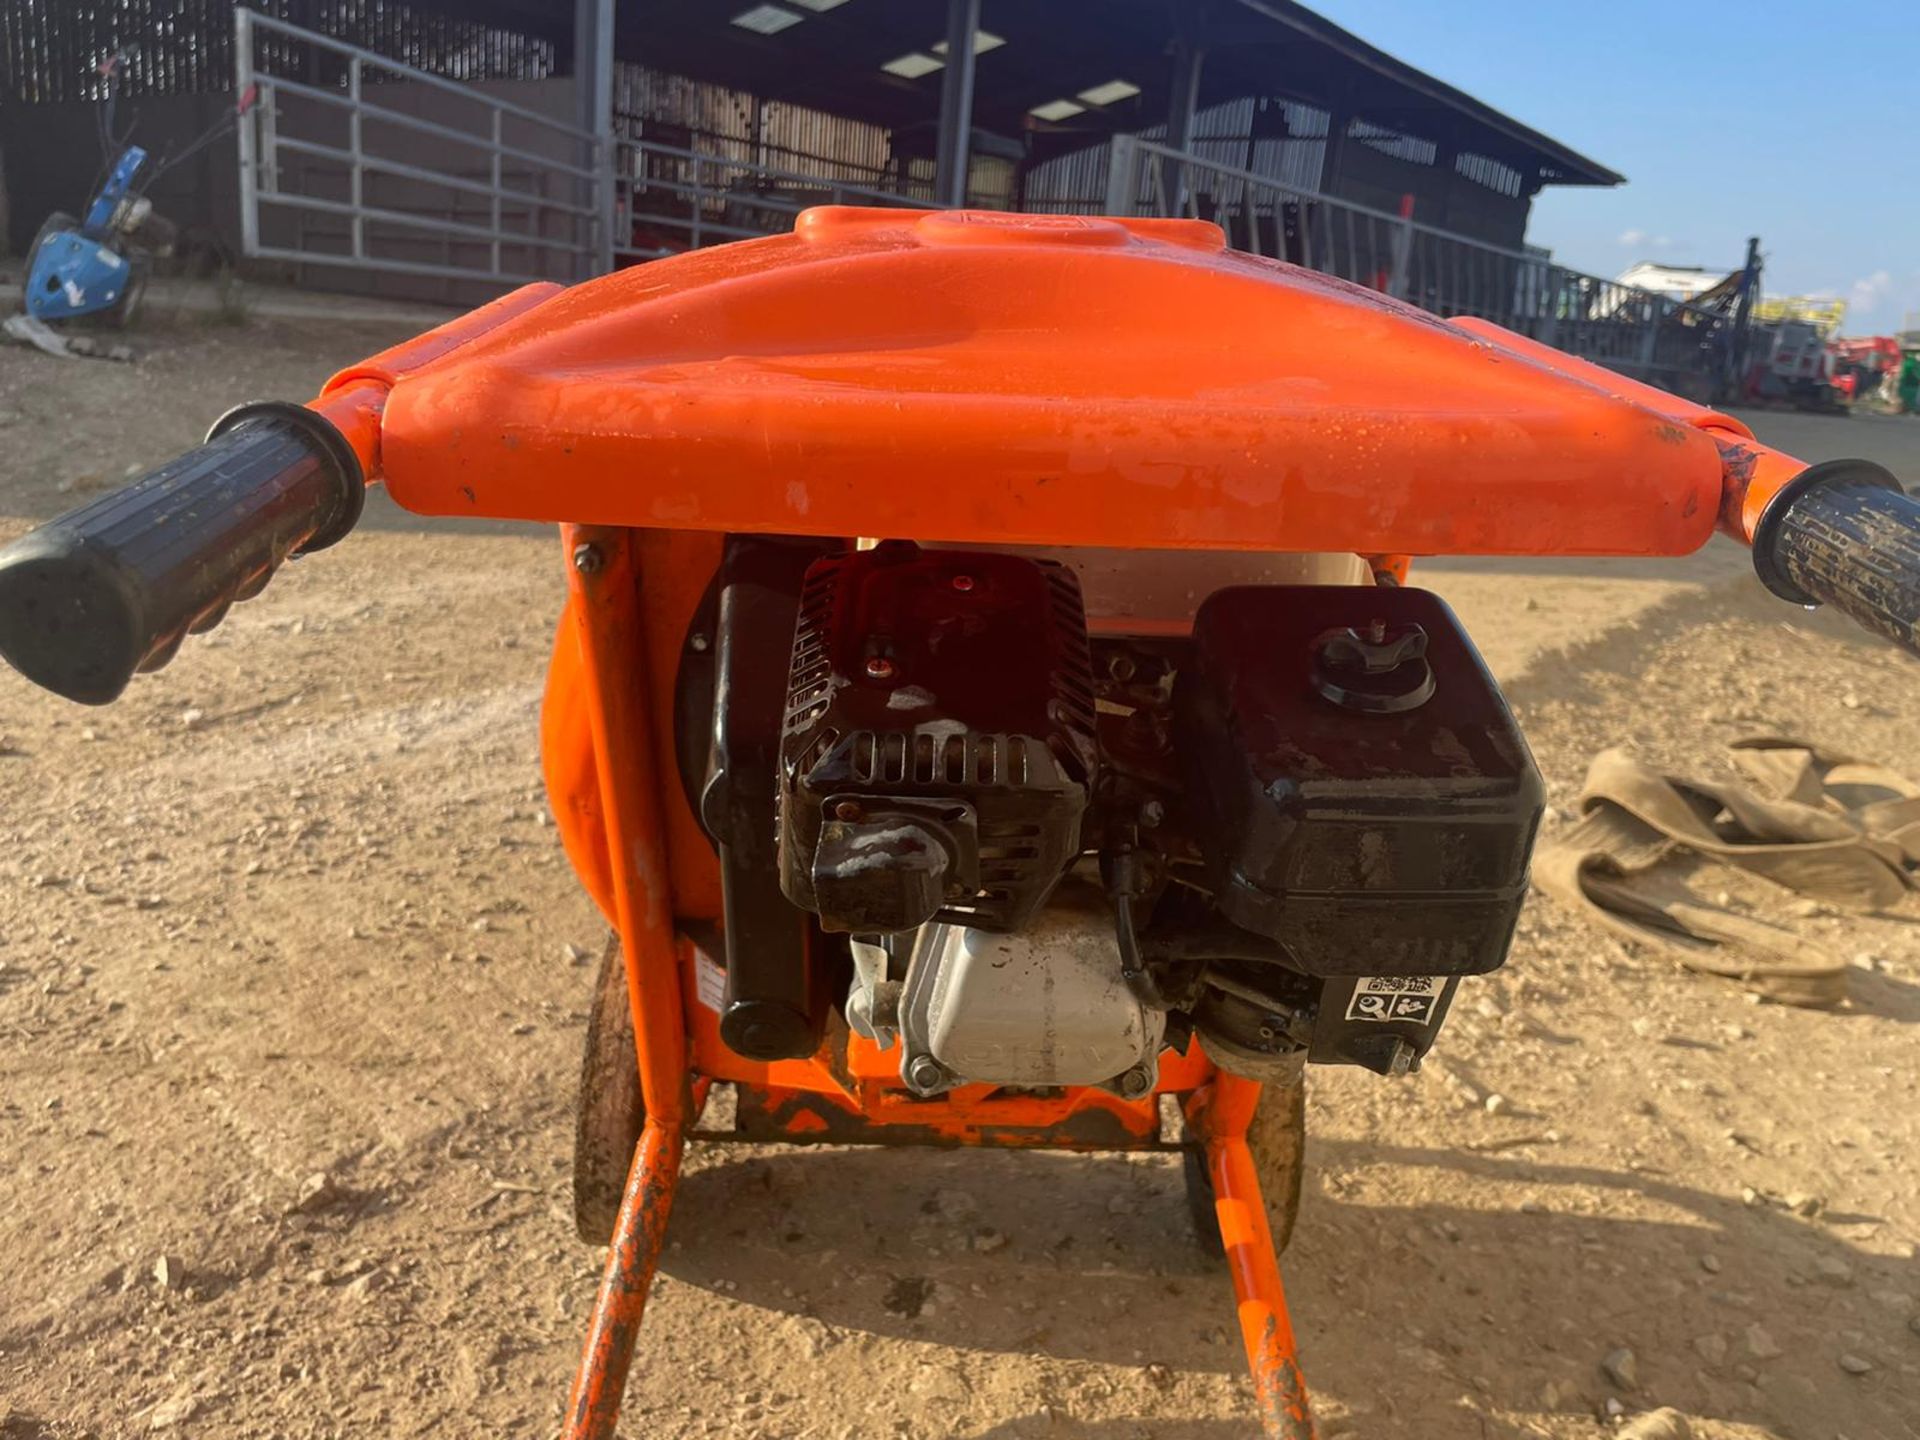 2019 BELLE MINI MIX 150 PETROL CEMENT MIXER, HONDA GX120 ENGINE, RUNS AND WORKS, GOOD COMPRESSION - Image 4 of 7